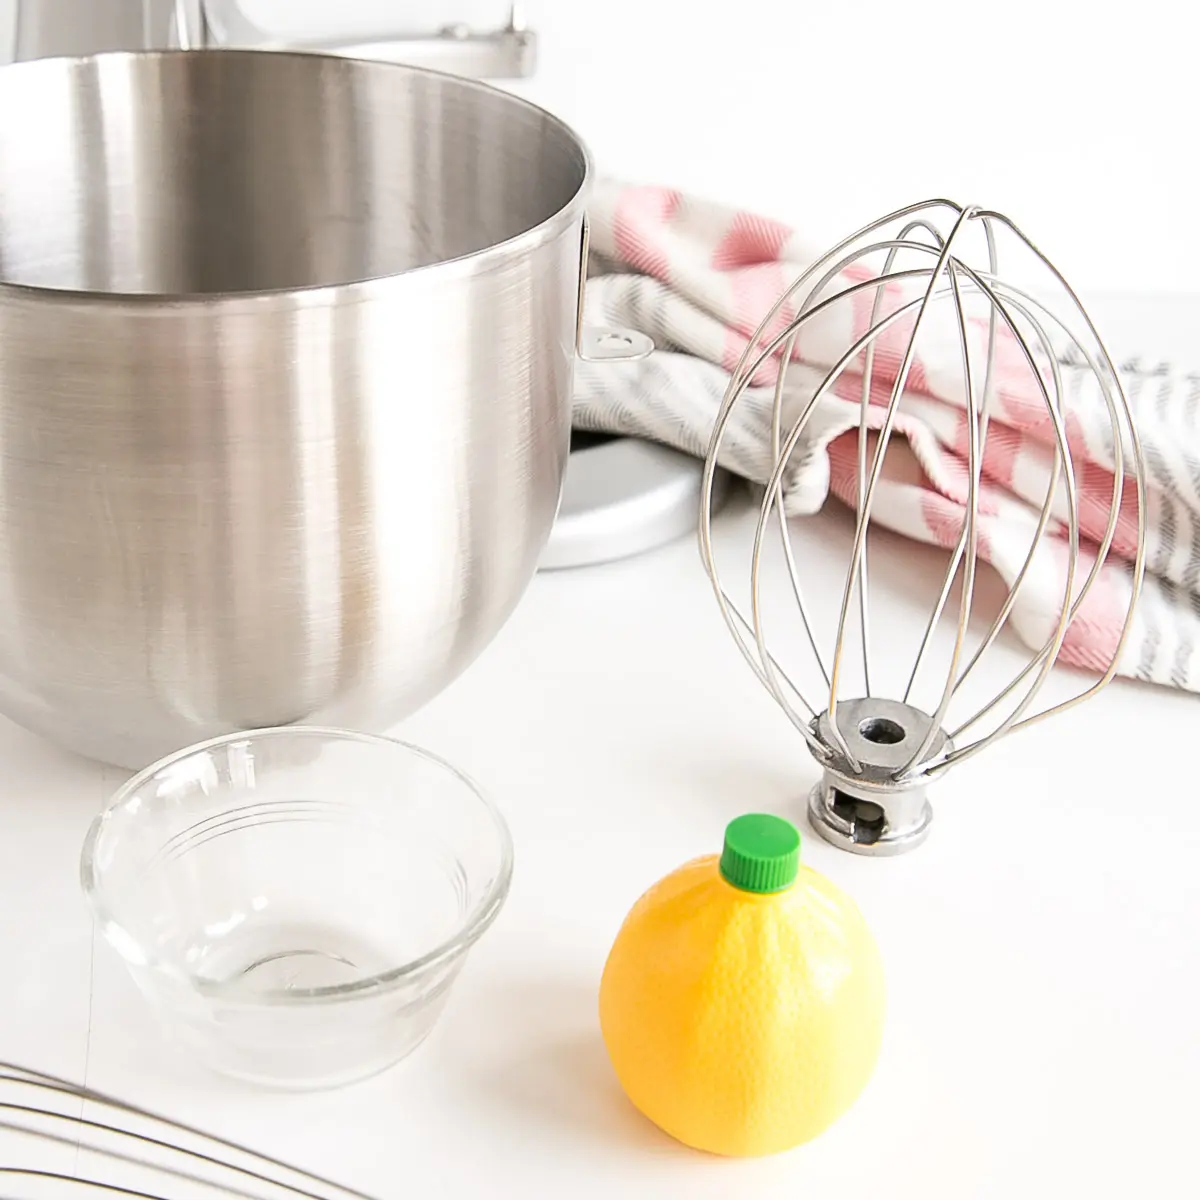 Tools to make the frosting -- mixer bowl, whisks, etc -- and lemon juice to wipe them down.